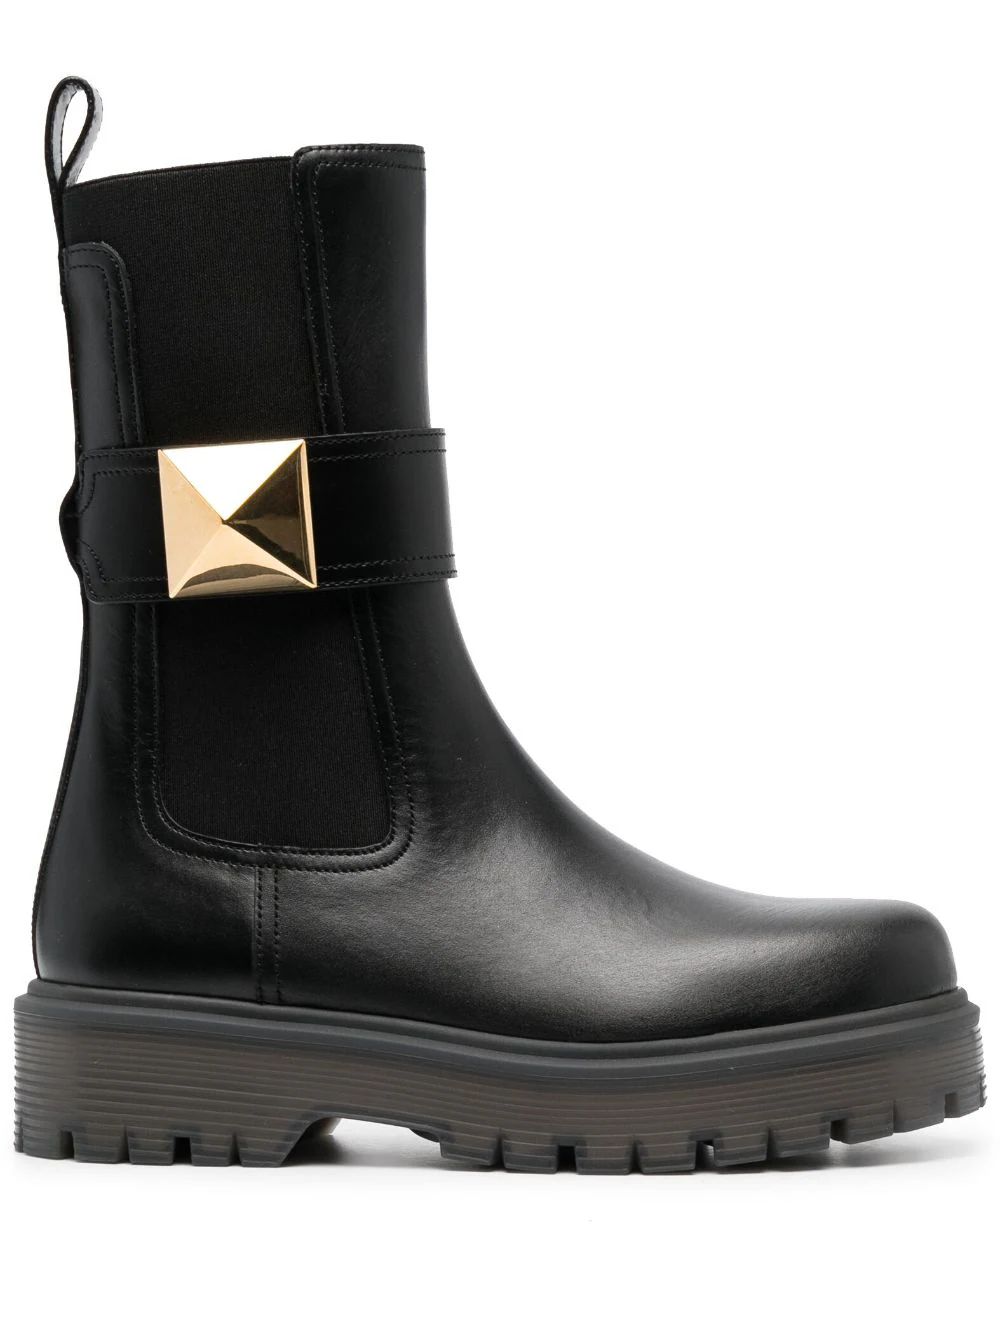 stud-embellished leather boots | Farfetch Global